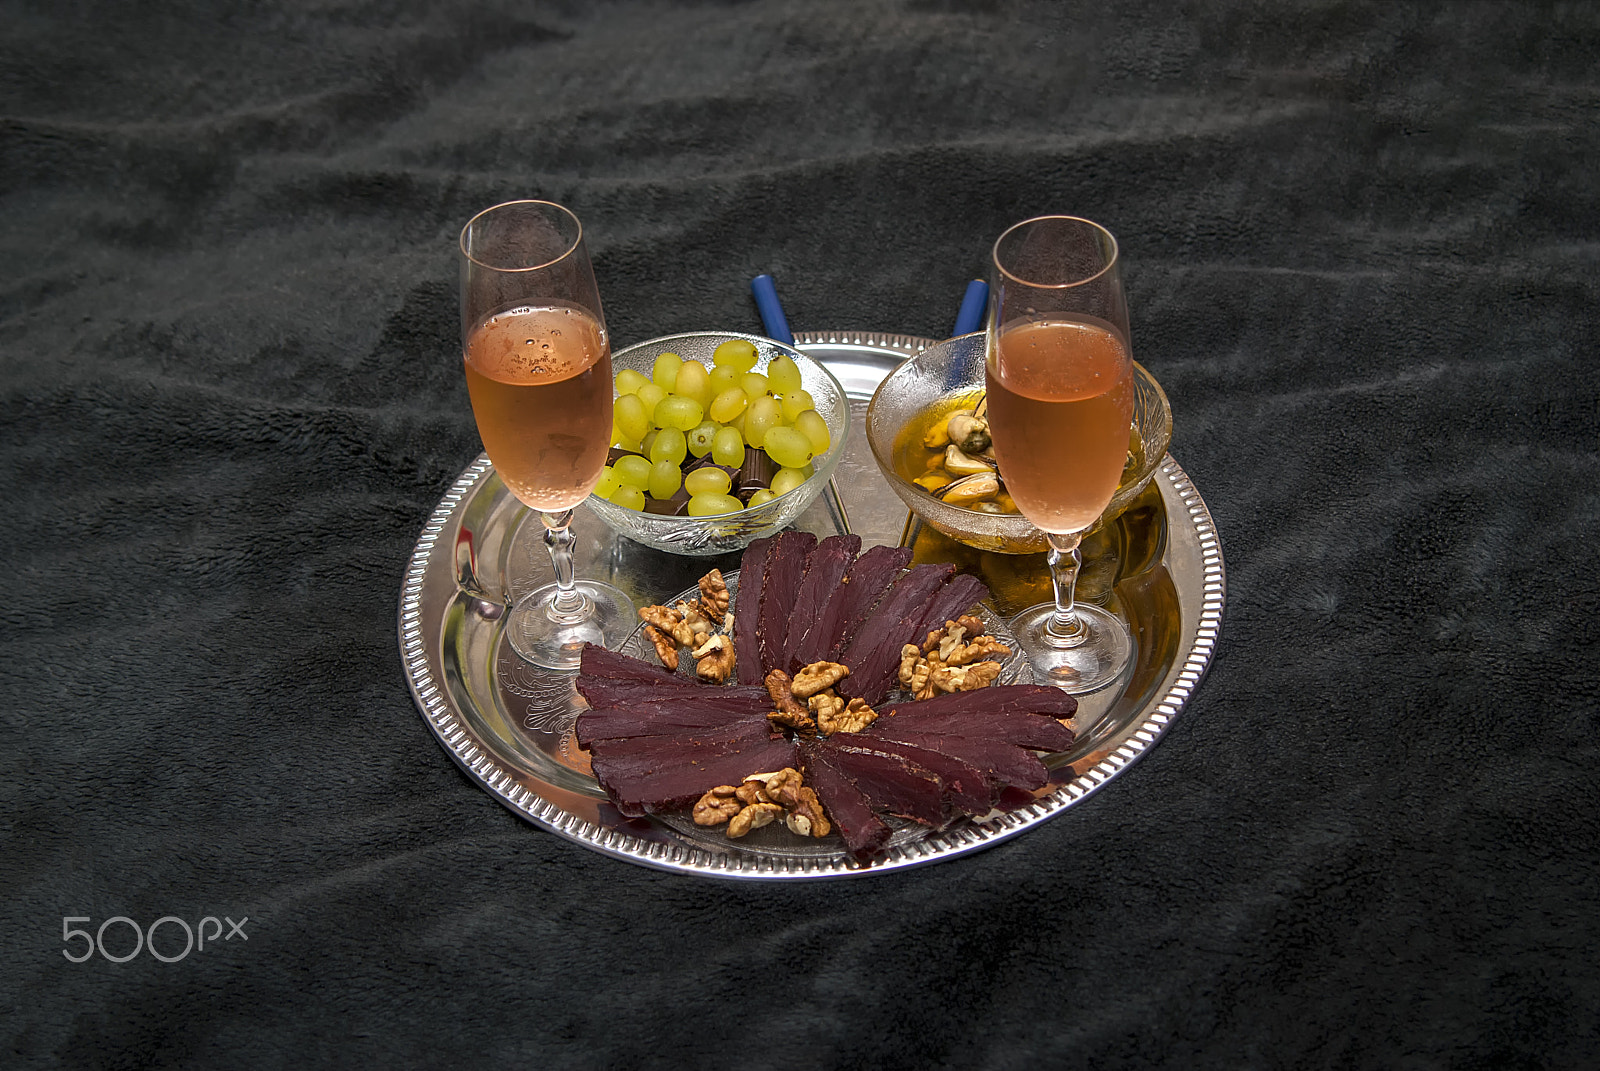 Nikon D80 sample photo. Fruits dish and champagne glasses photography